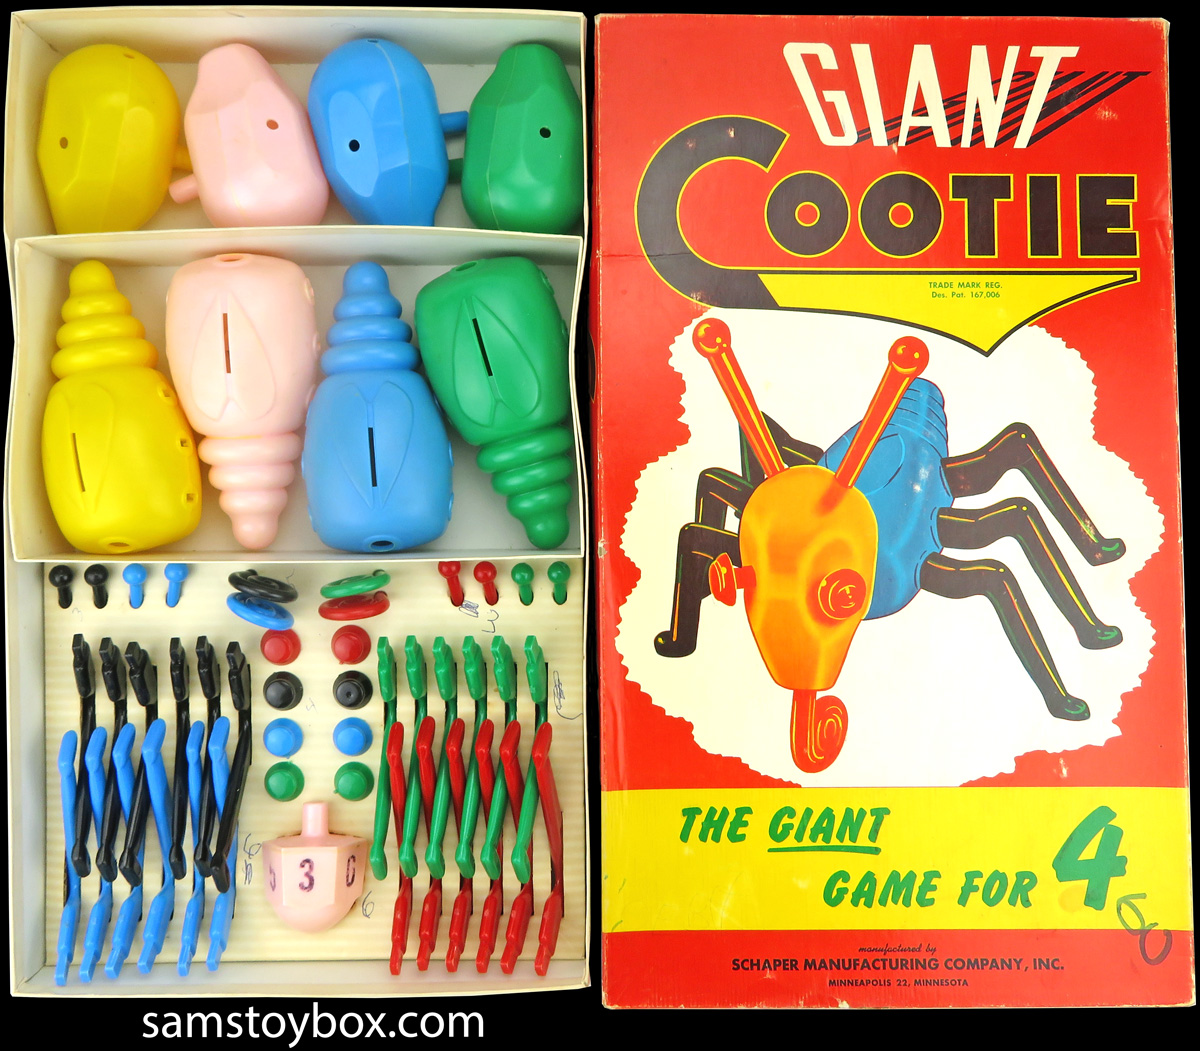 The box and contents of 1950s Giant Cootie